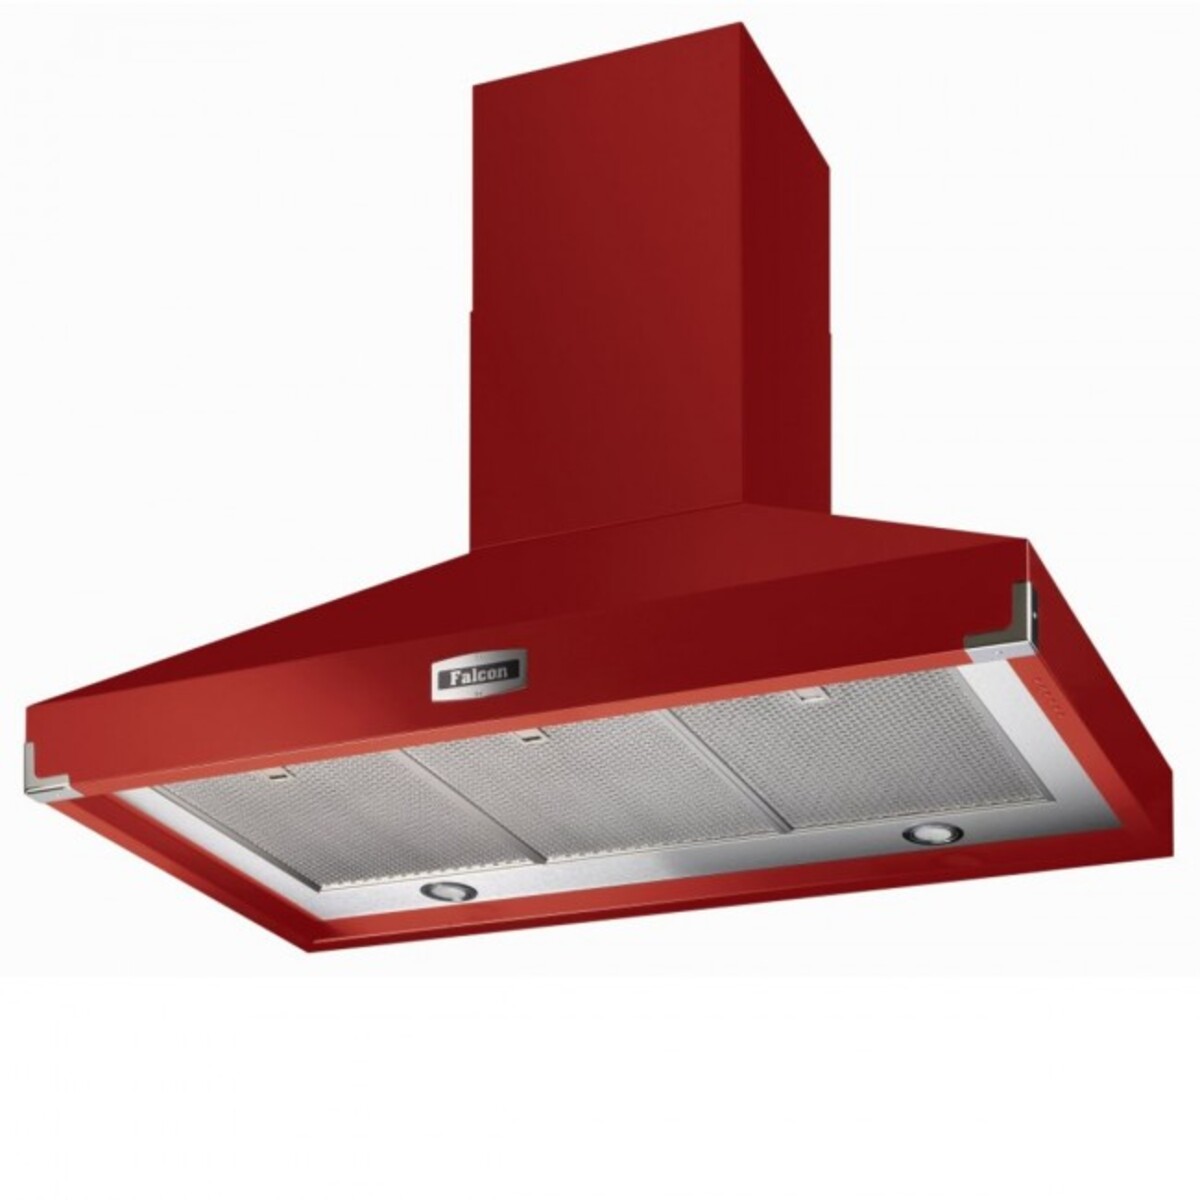 FALCON FHDSE1092RDN 90870 1092 S-EXTRACT HOOD CHERRY RED NICKEL